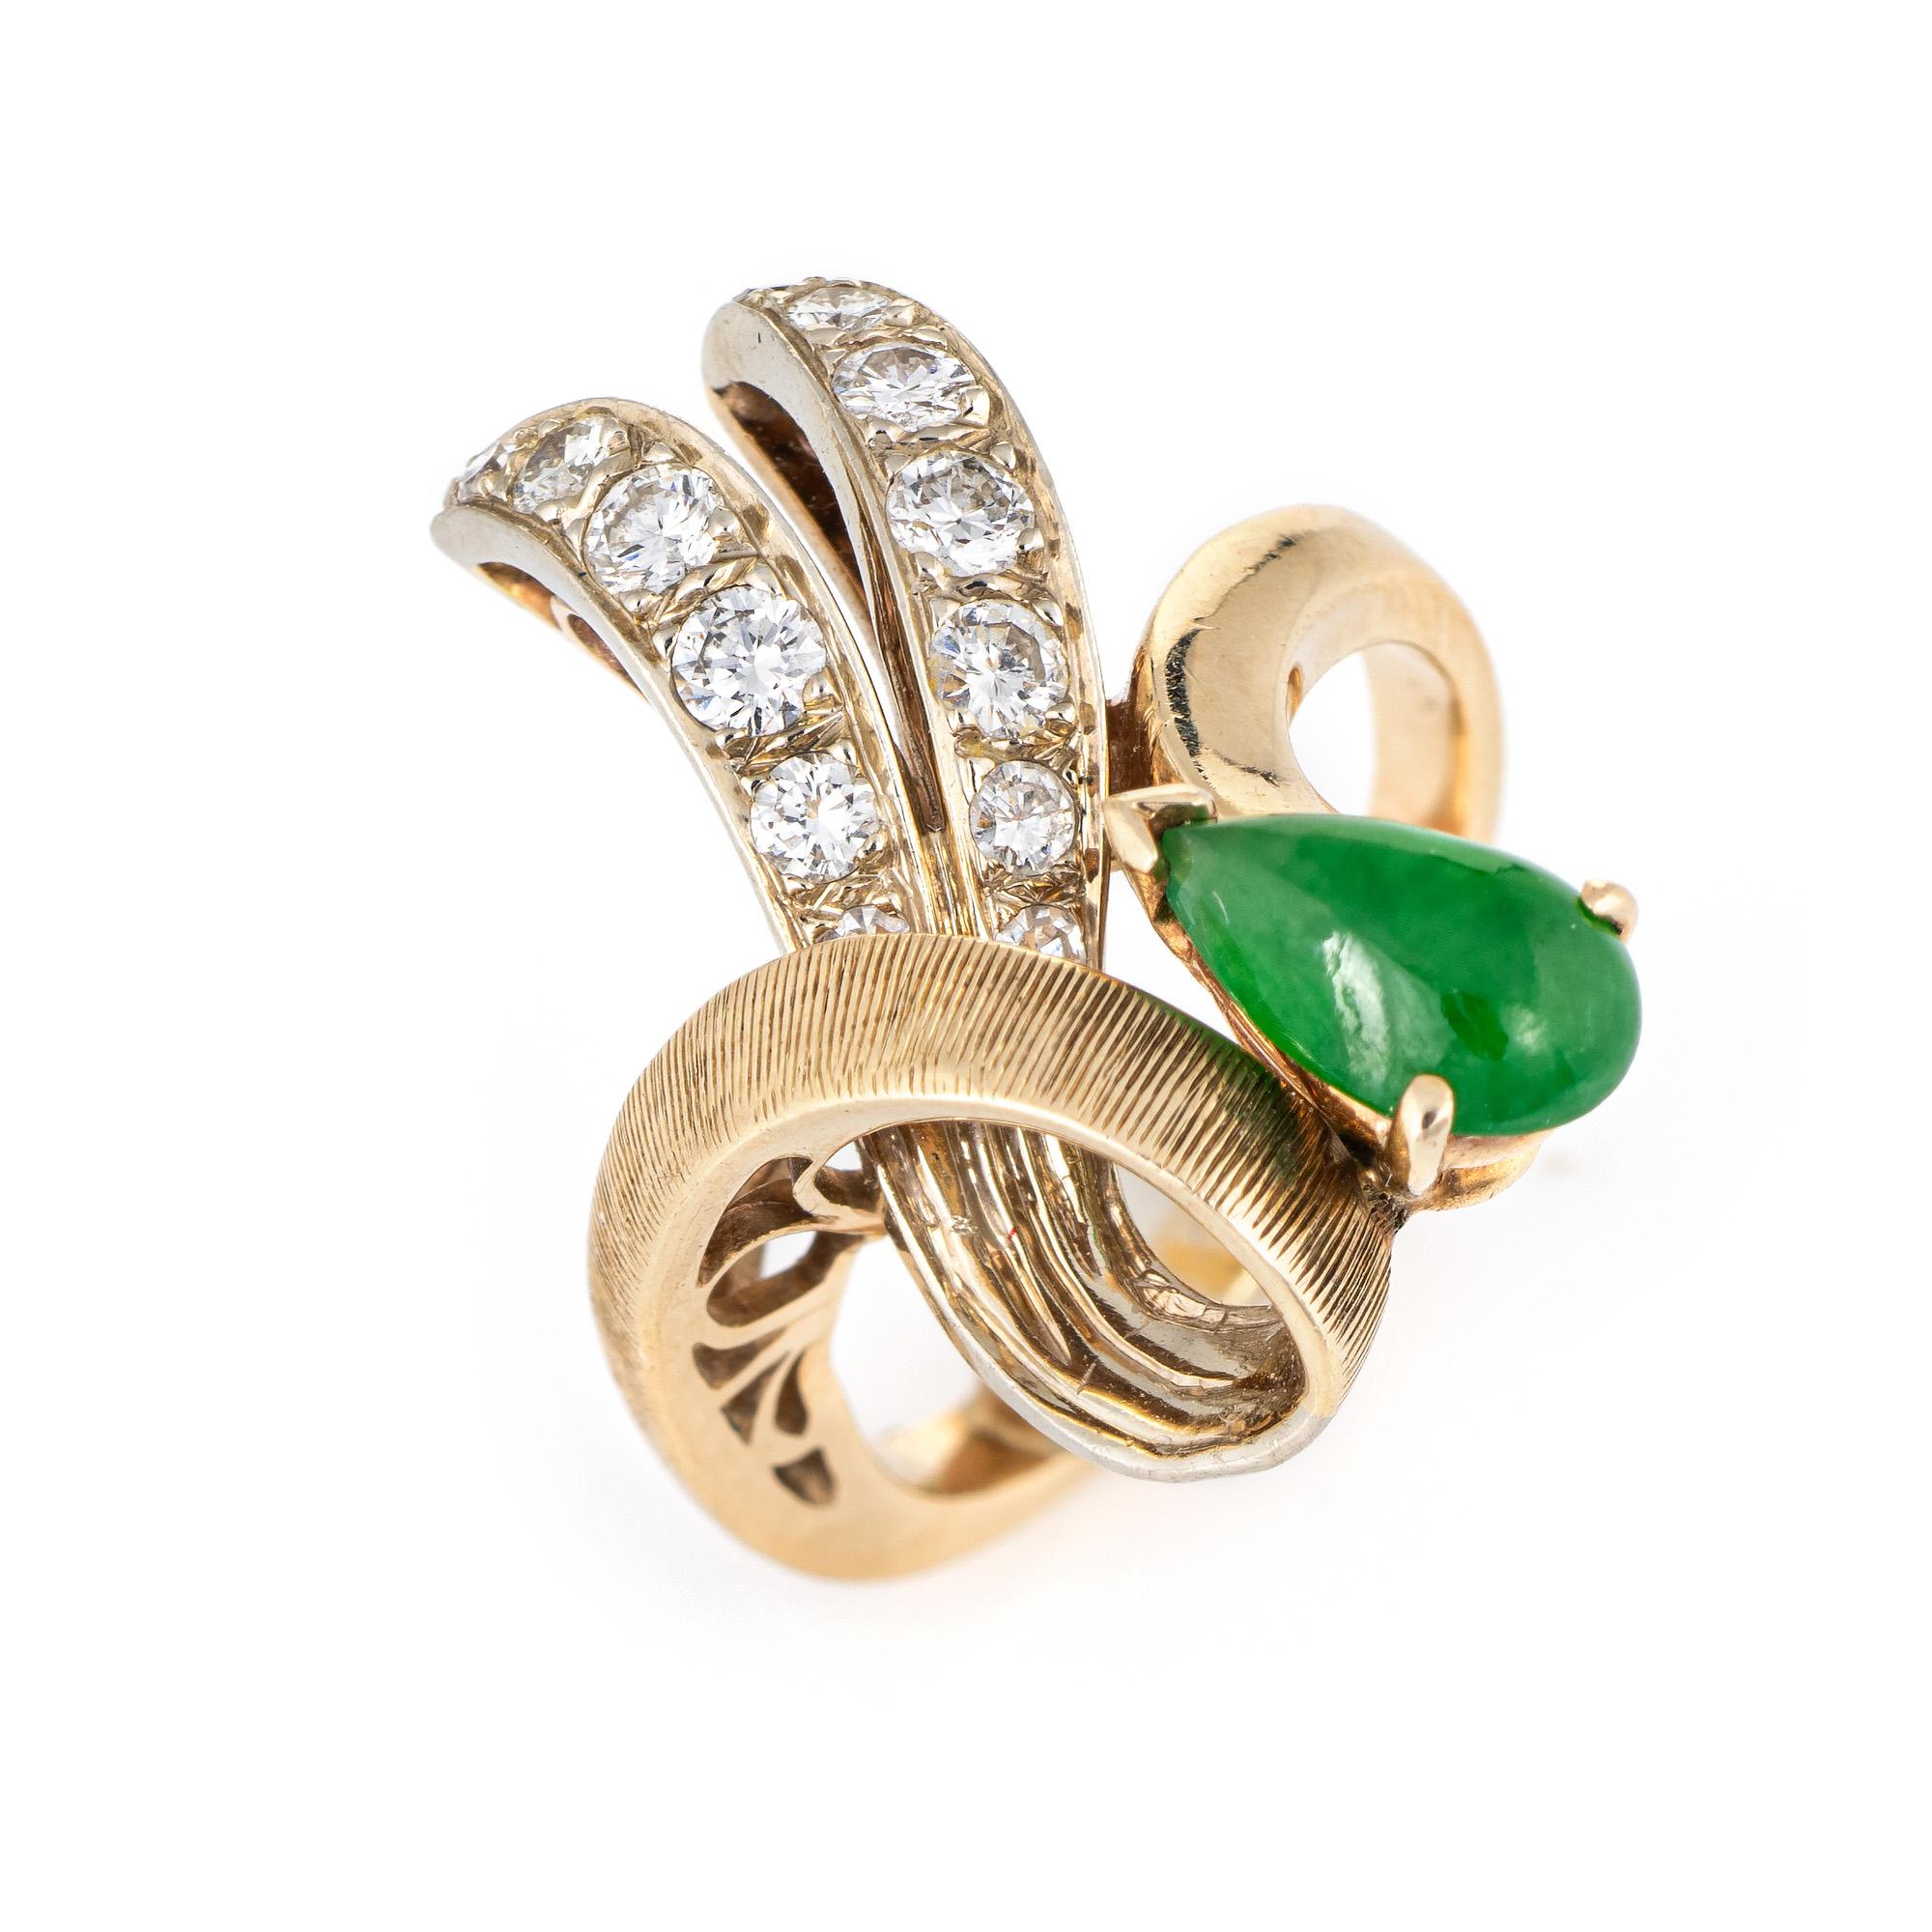 Stylish vintage jade & diamond cocktail ring (circa 1960s to 1970s) crafted in 14 karat yellow gold. 

Cabochon cut pear shaped jade measures 8mm x 4mm (estimated at 0.50 carats), accented with an estimated 0.22 carat of diamonds (estimated at H-I